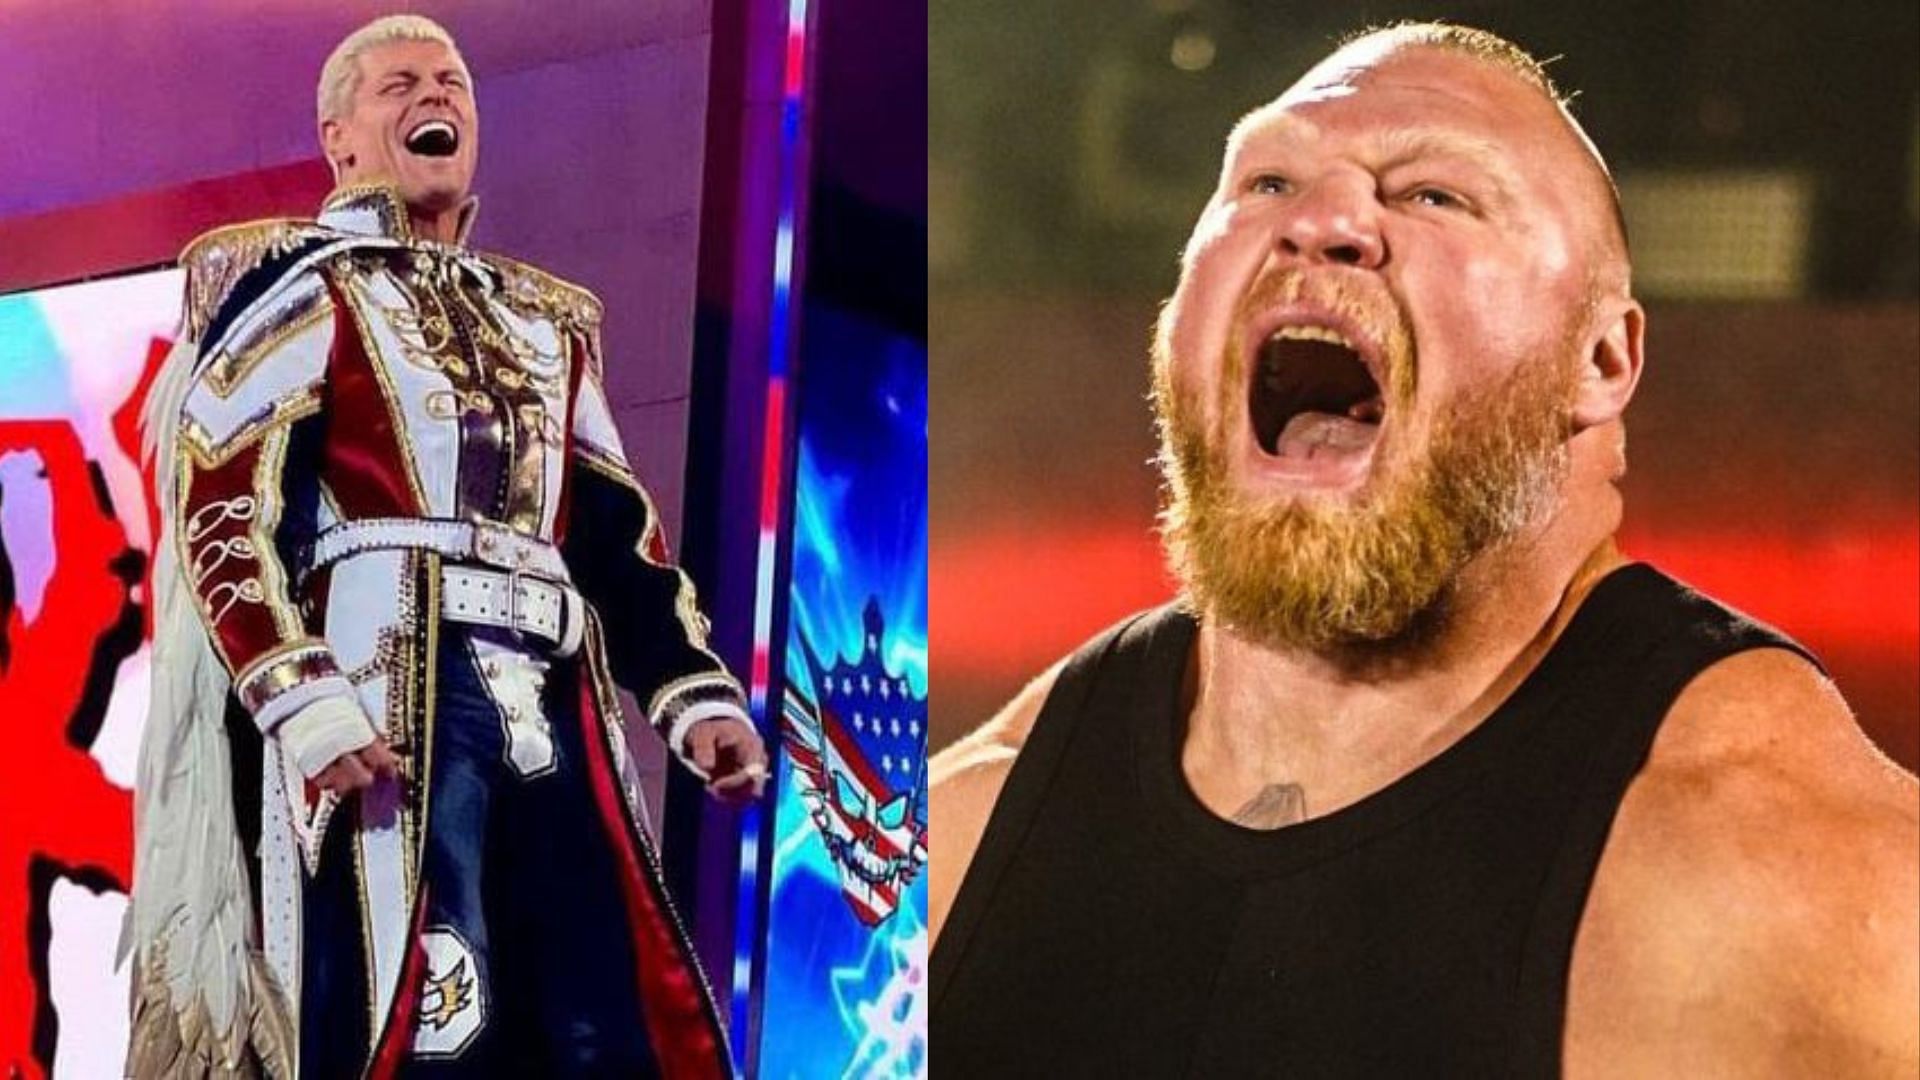 Brock Lesnar and Cody Rhodes are both signed with WWE